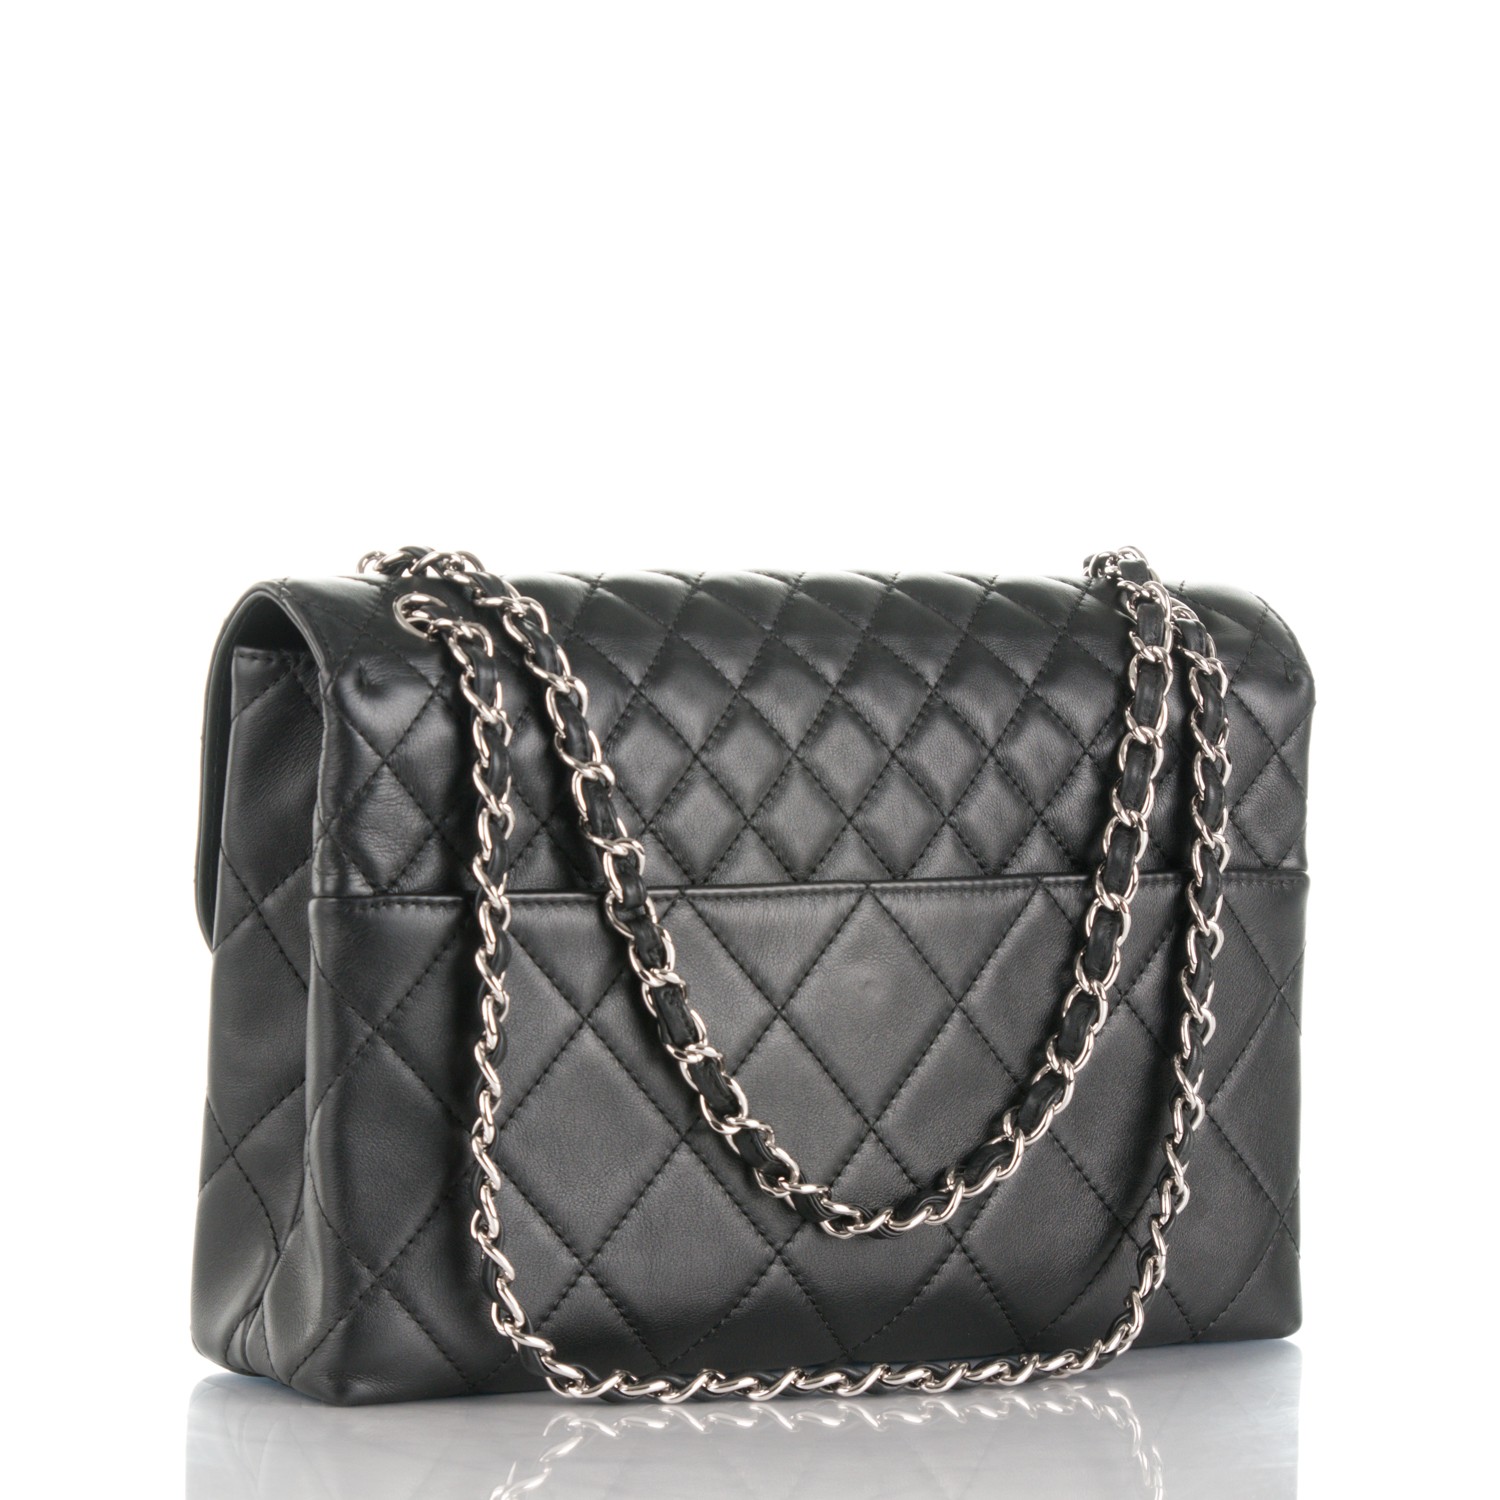 CHANEL Calfskin Quilted In The Business Flap Bag Black 174524